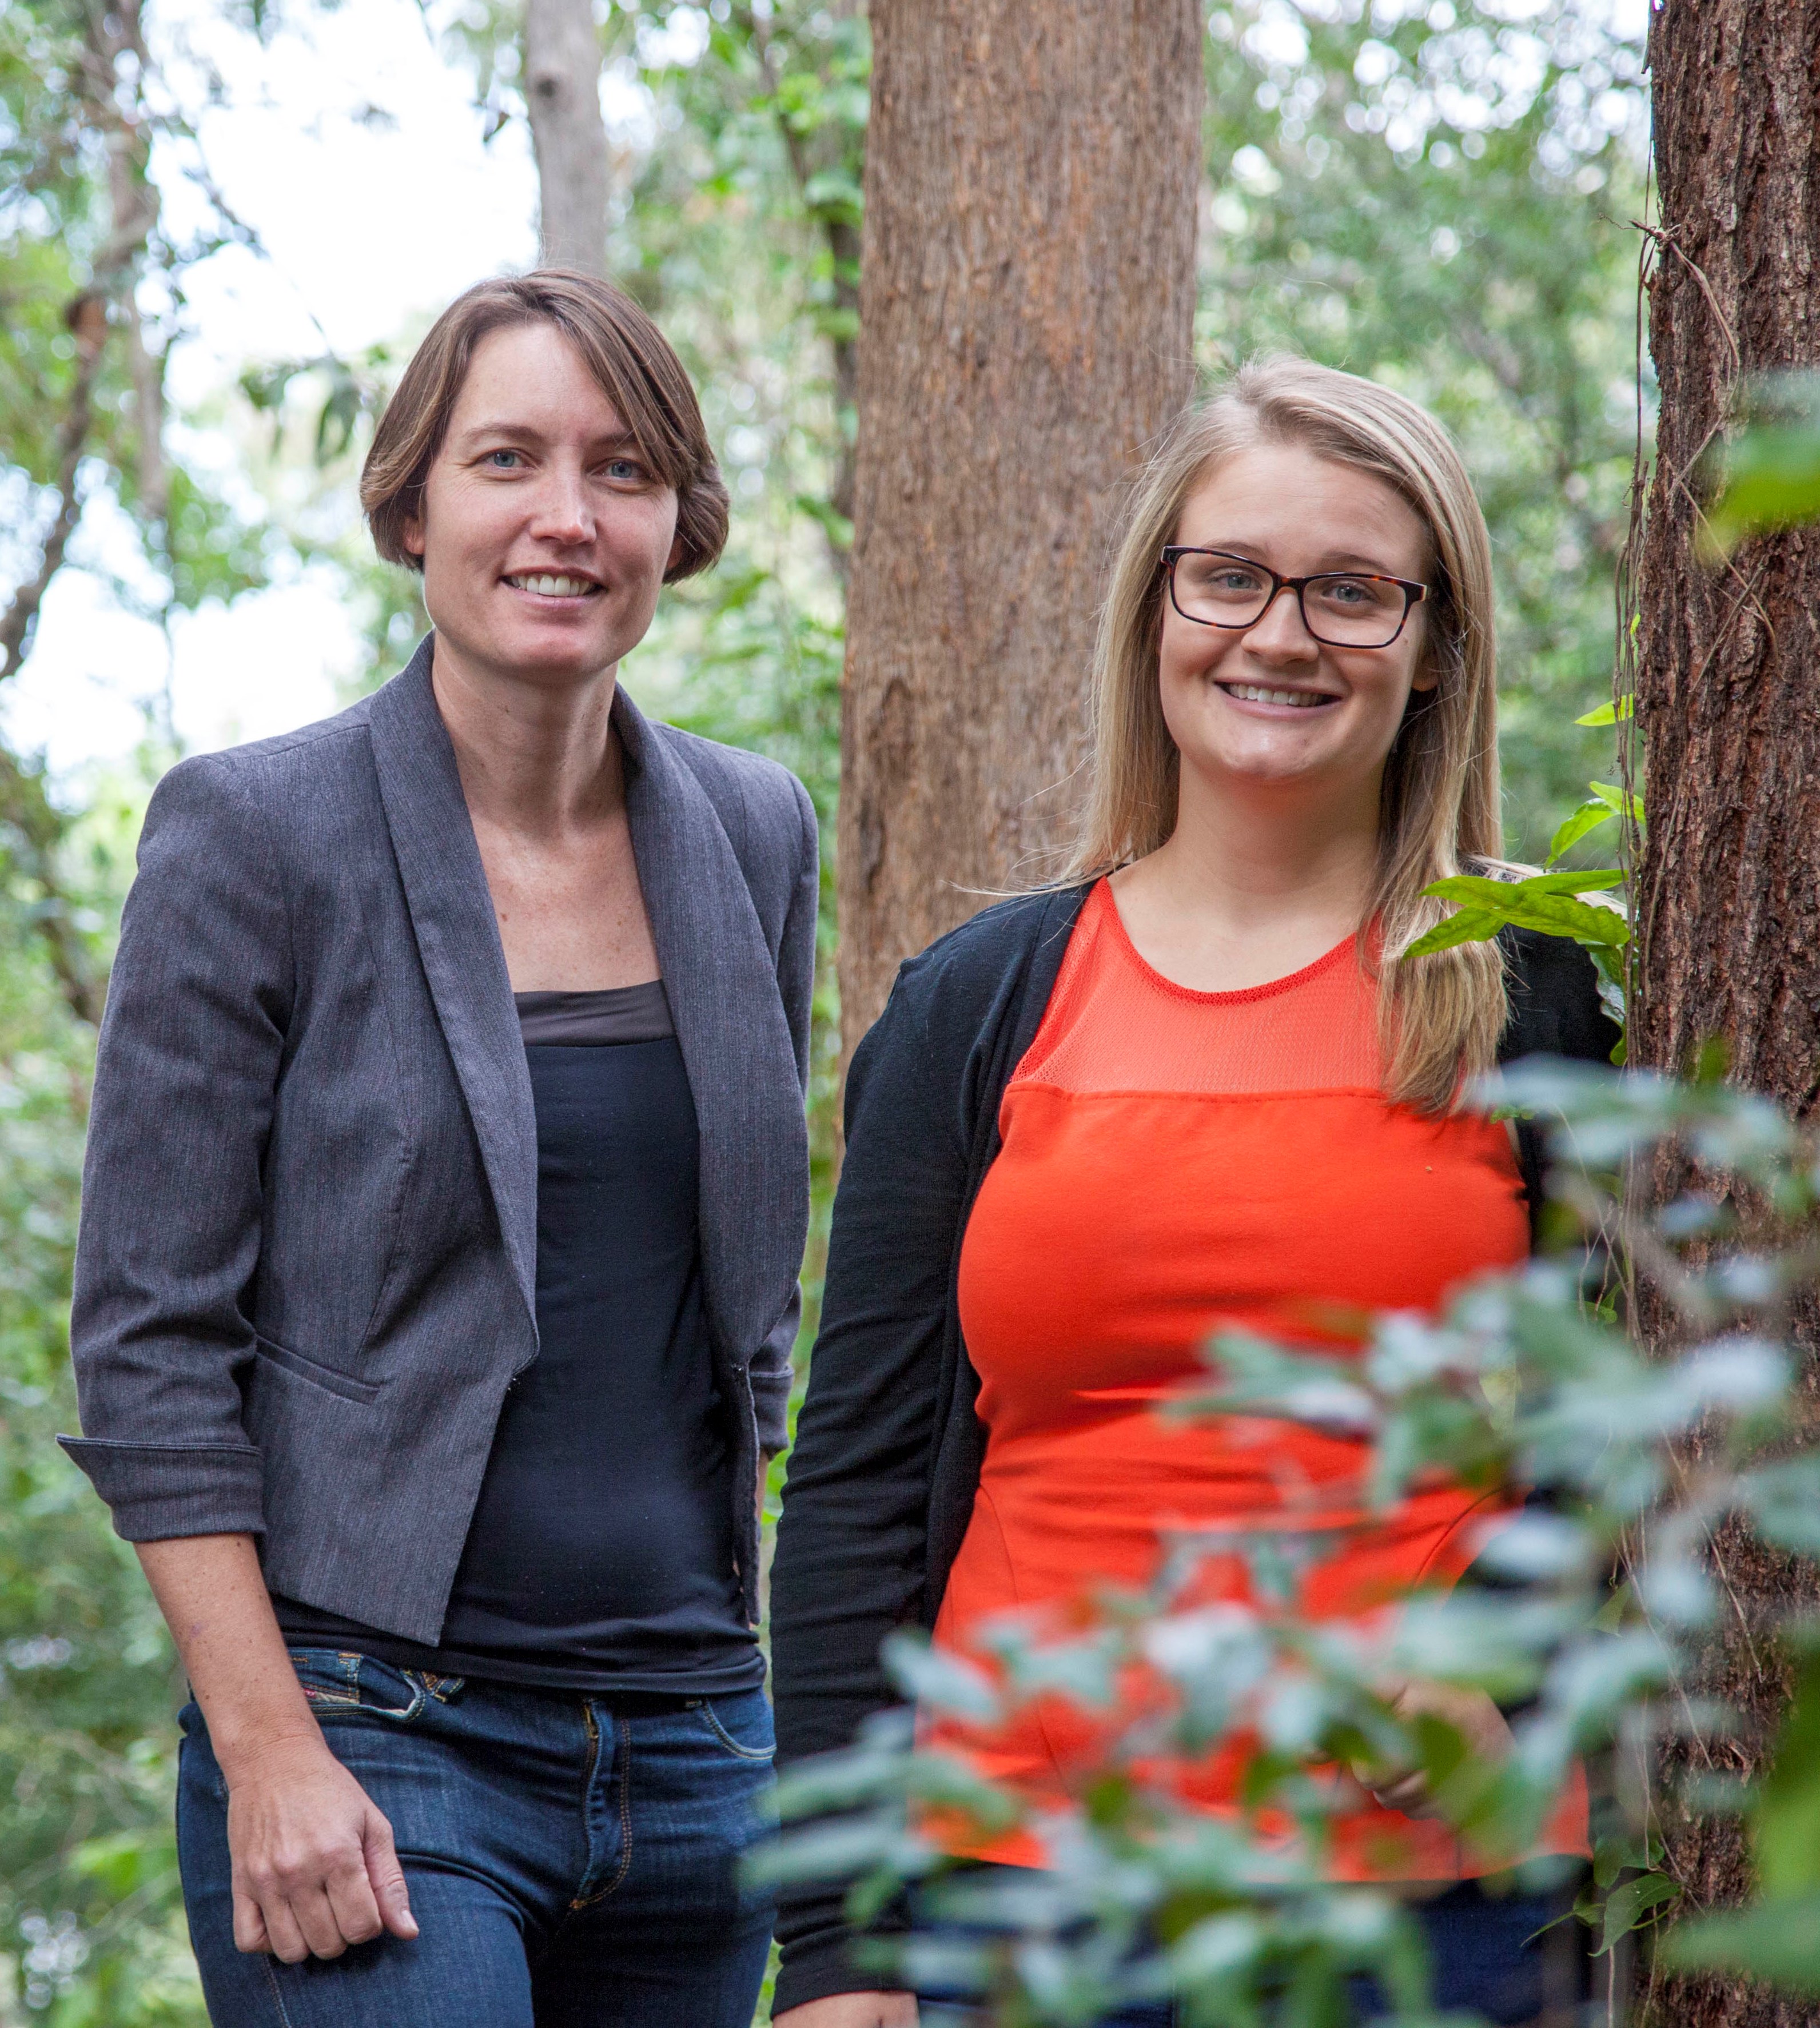 Griffith lecturer and forensic biologist Kirsty Wright and honours student Felicity Poulsen are assisting the Australian Defence Force (ADF) identify unrecovered Australian servicemen.